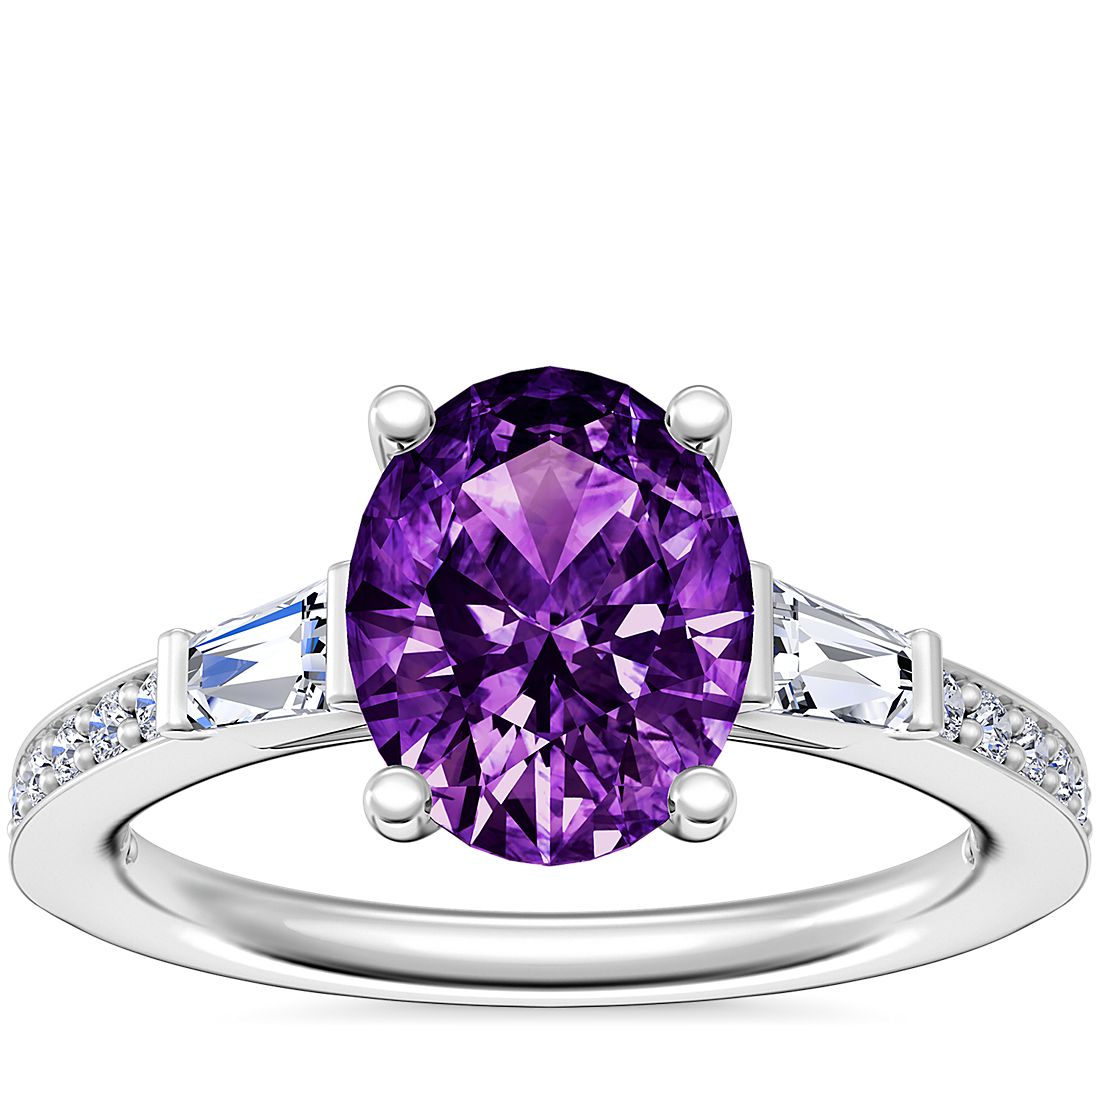 Tapered Baguette Diamond Cathedral Engagement Ring with Oval Amethyst in 14k White Gold (9x7mm)